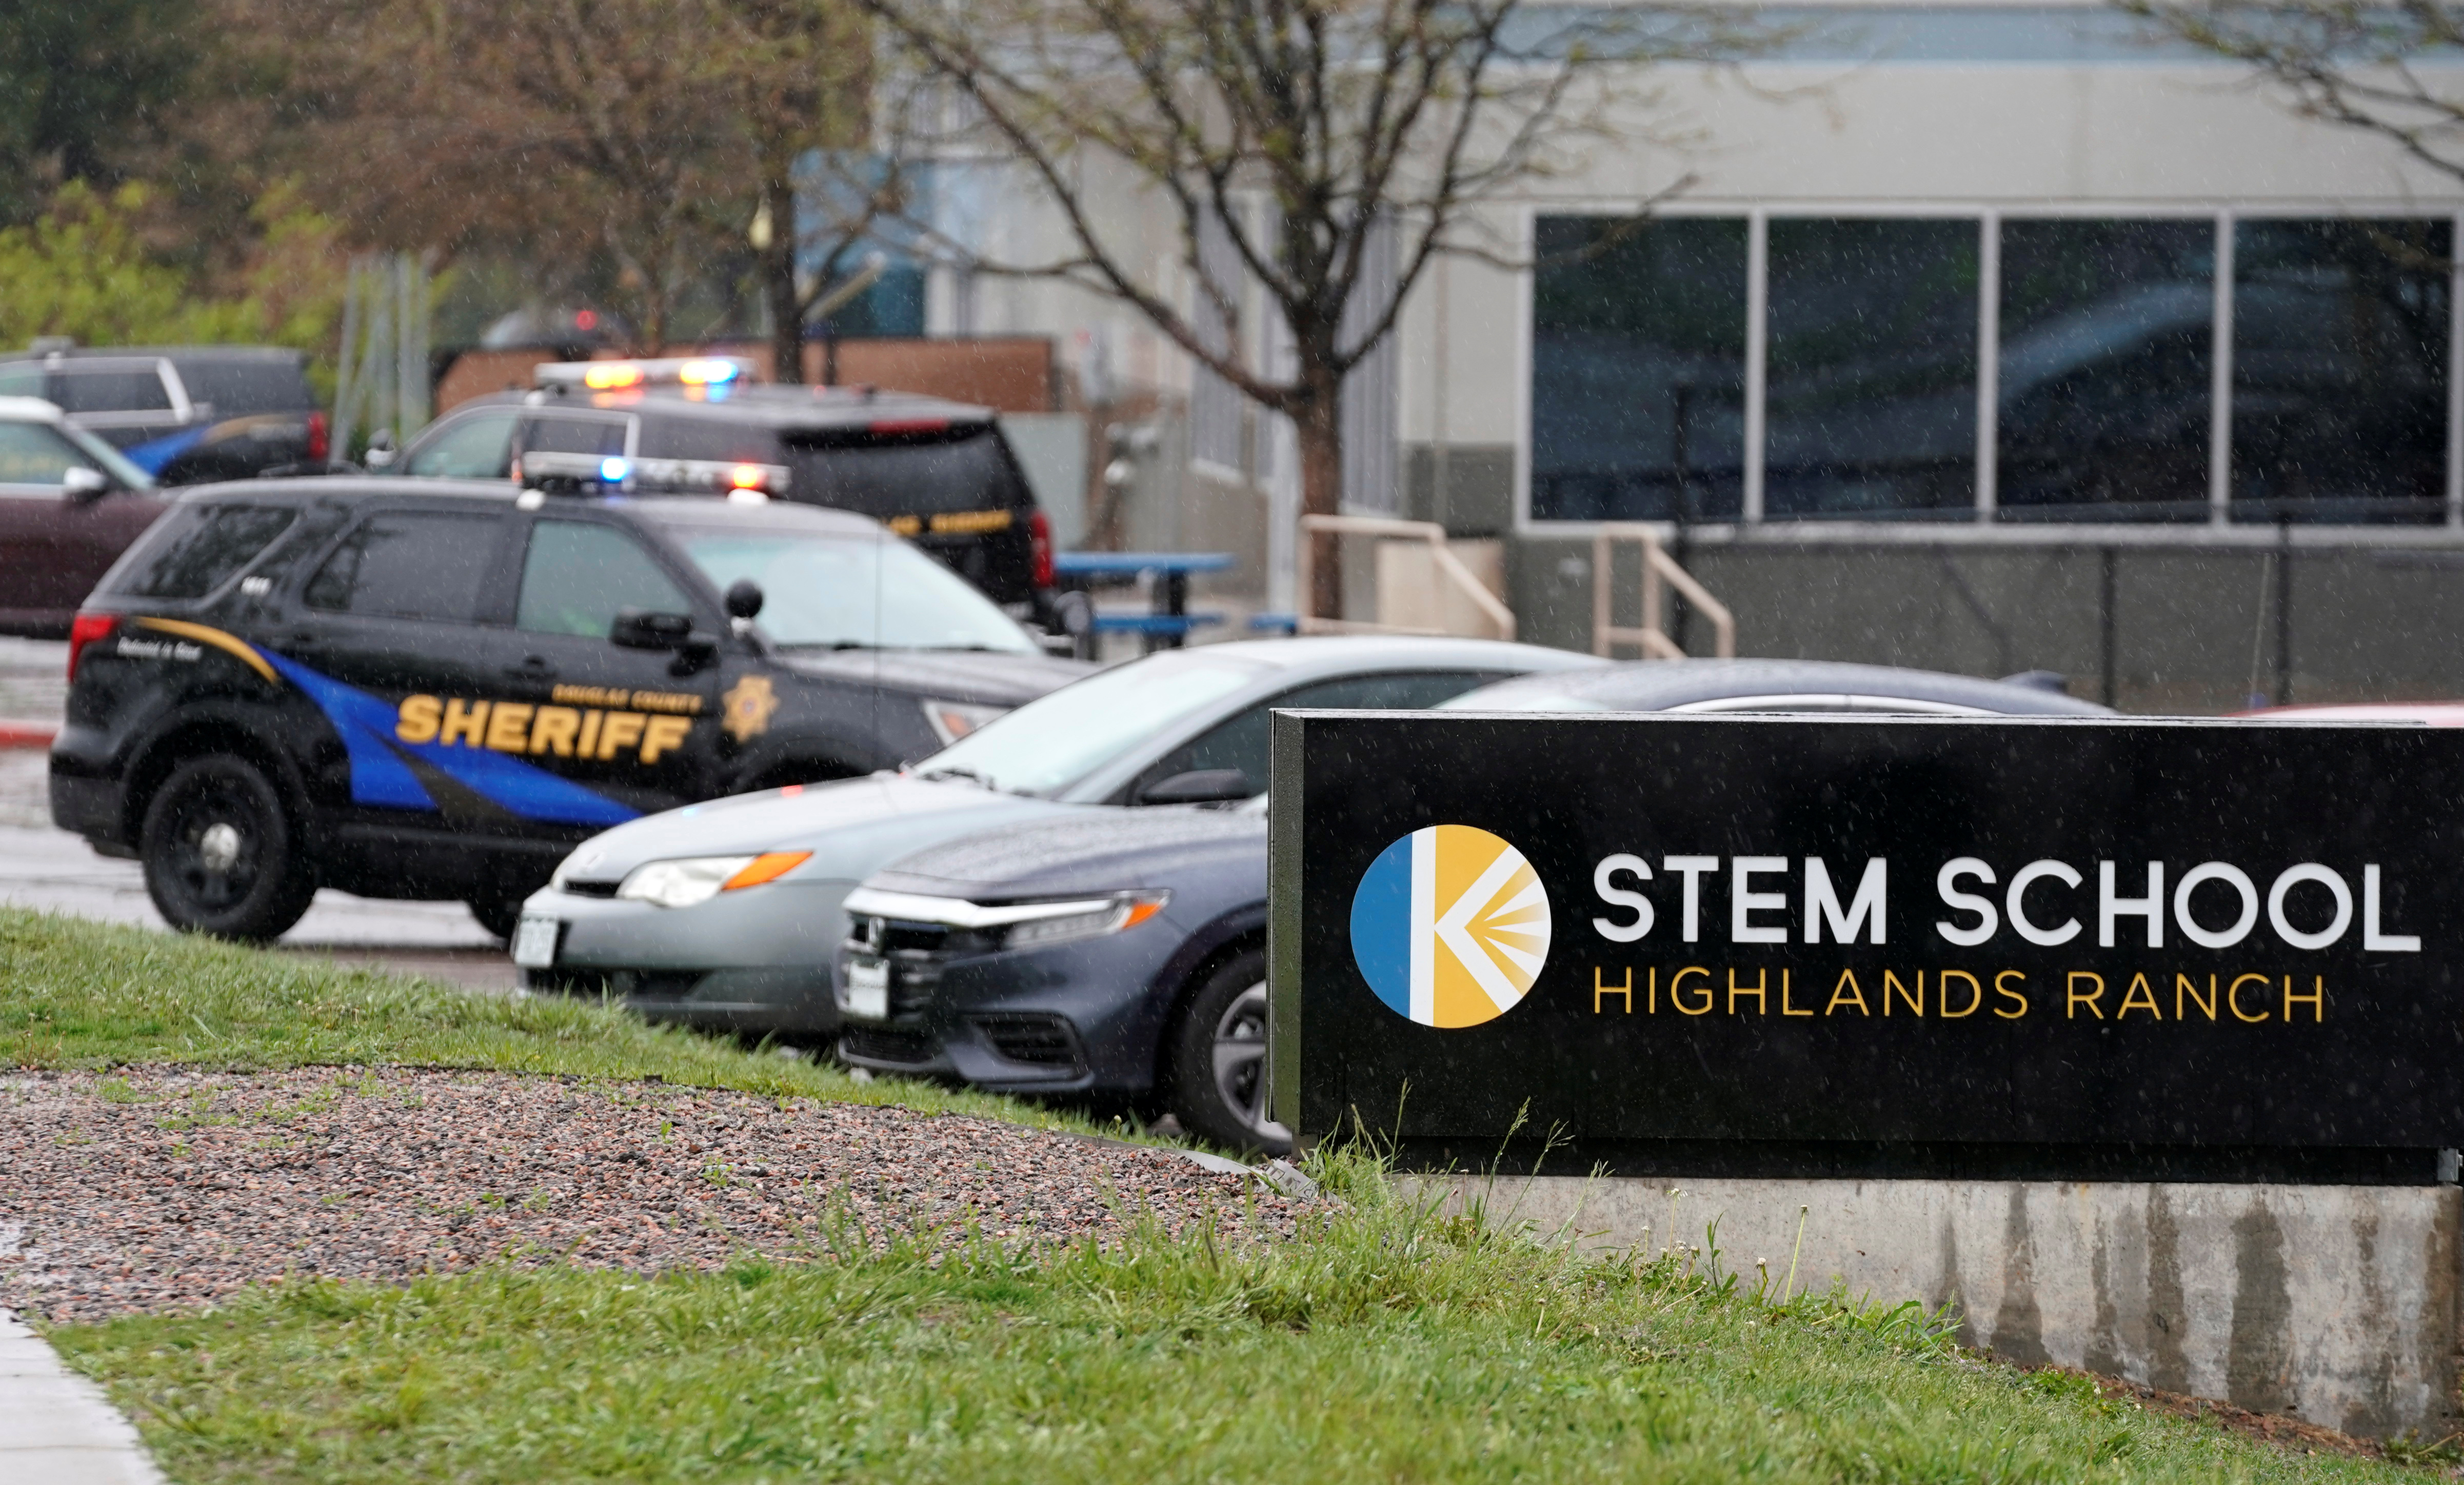 Police vehicles are stationed outside the school following the shooting at the Science, Technology, Engineering and Math (STEM) School in Highlands Ranch, Colorado, U.S., May 8, 2019. REUTERS/Rick Wilking